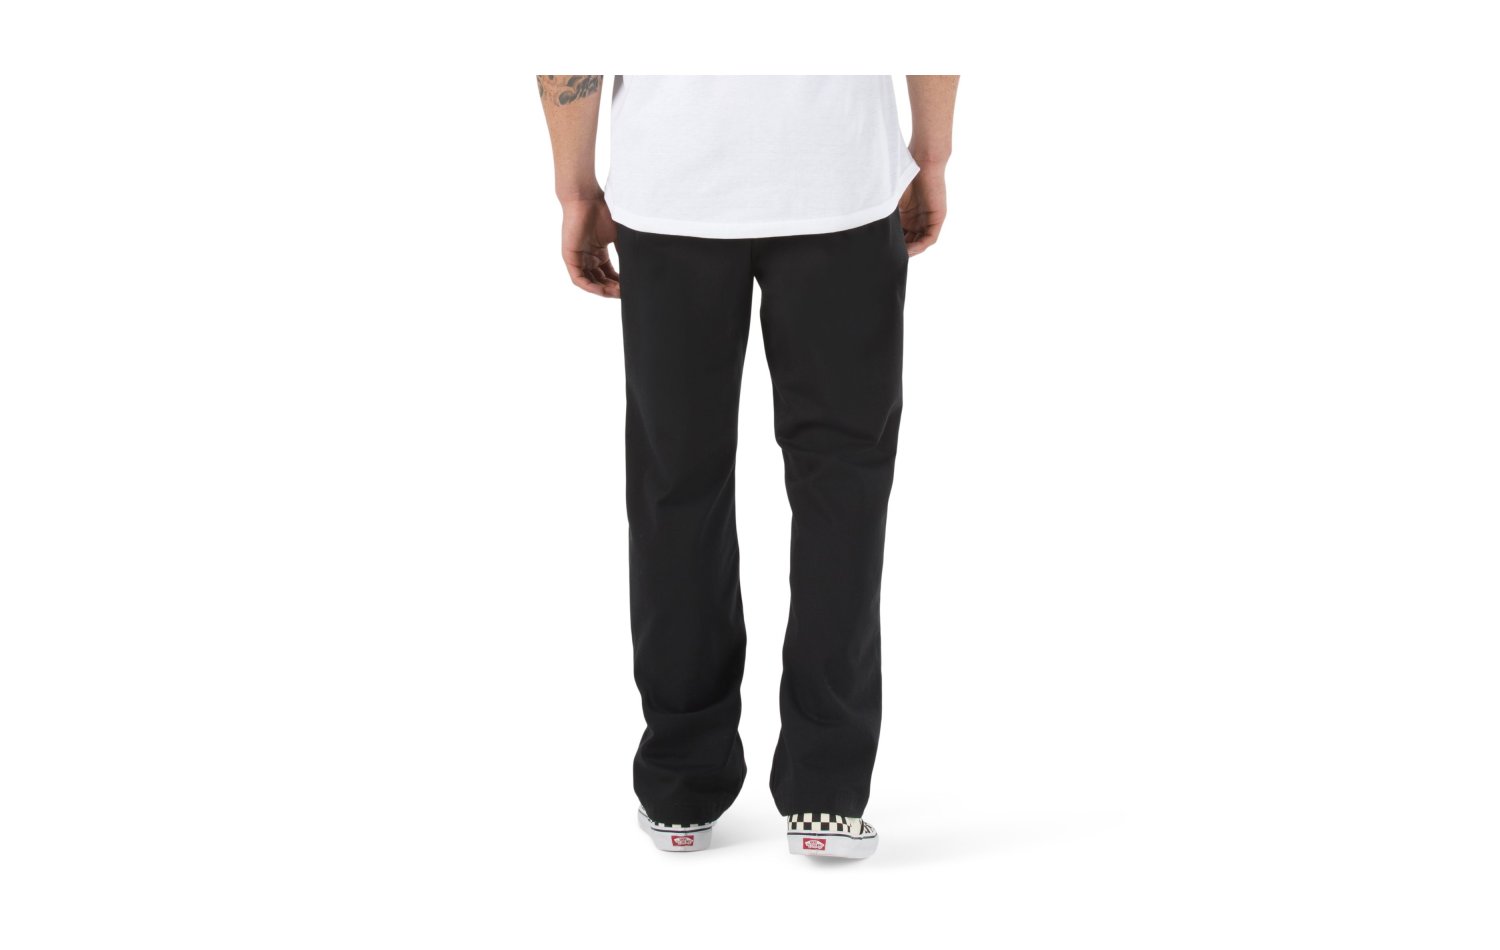 Vans Authentic Chino Relaxed Pant (VN0A5FJ8BLK)